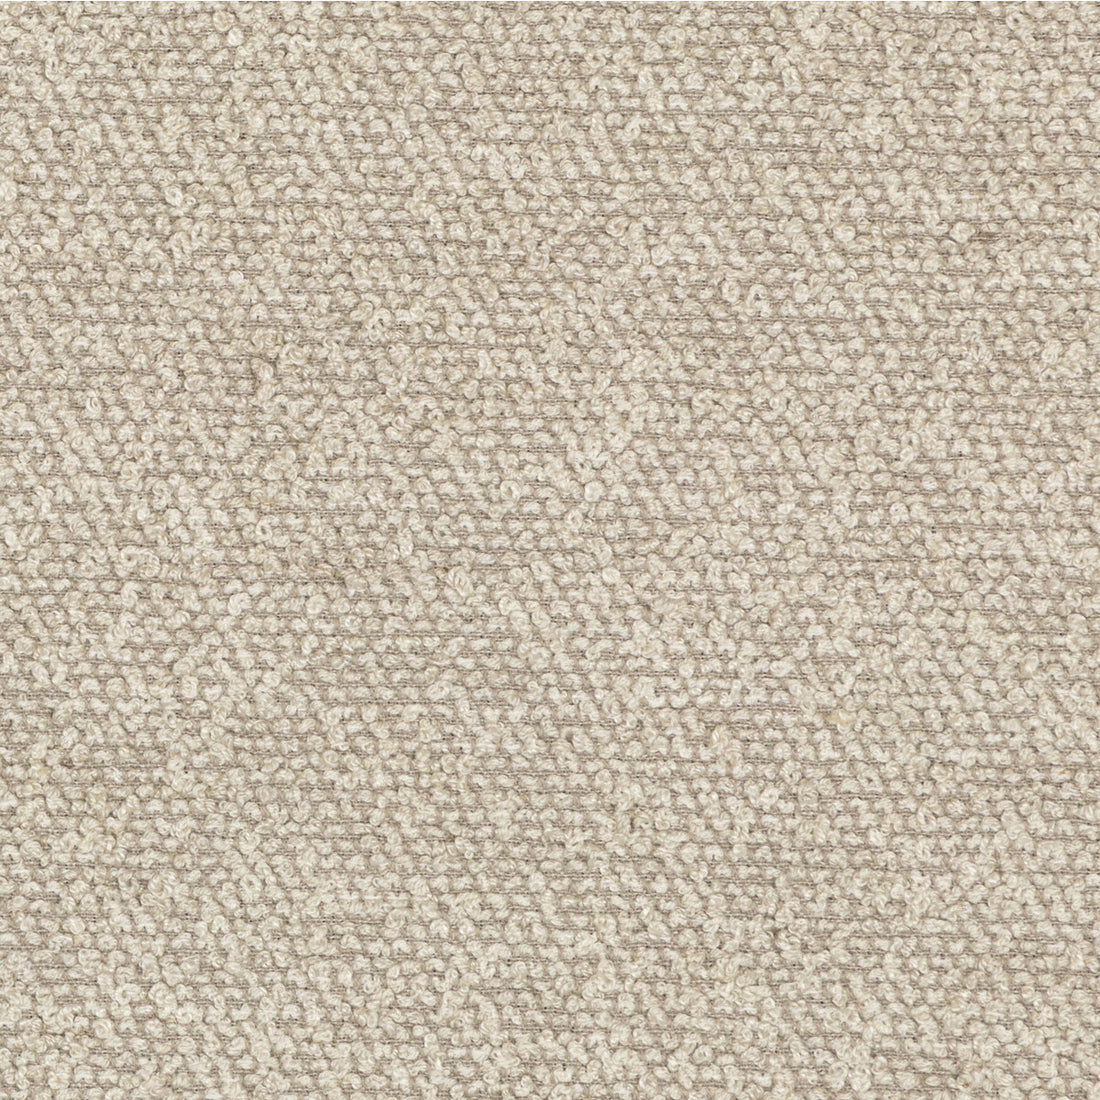 Kravet Couture fabric in 36614-106 color - pattern 36614.106.0 - by Kravet Couture in the Mabley Handler collection